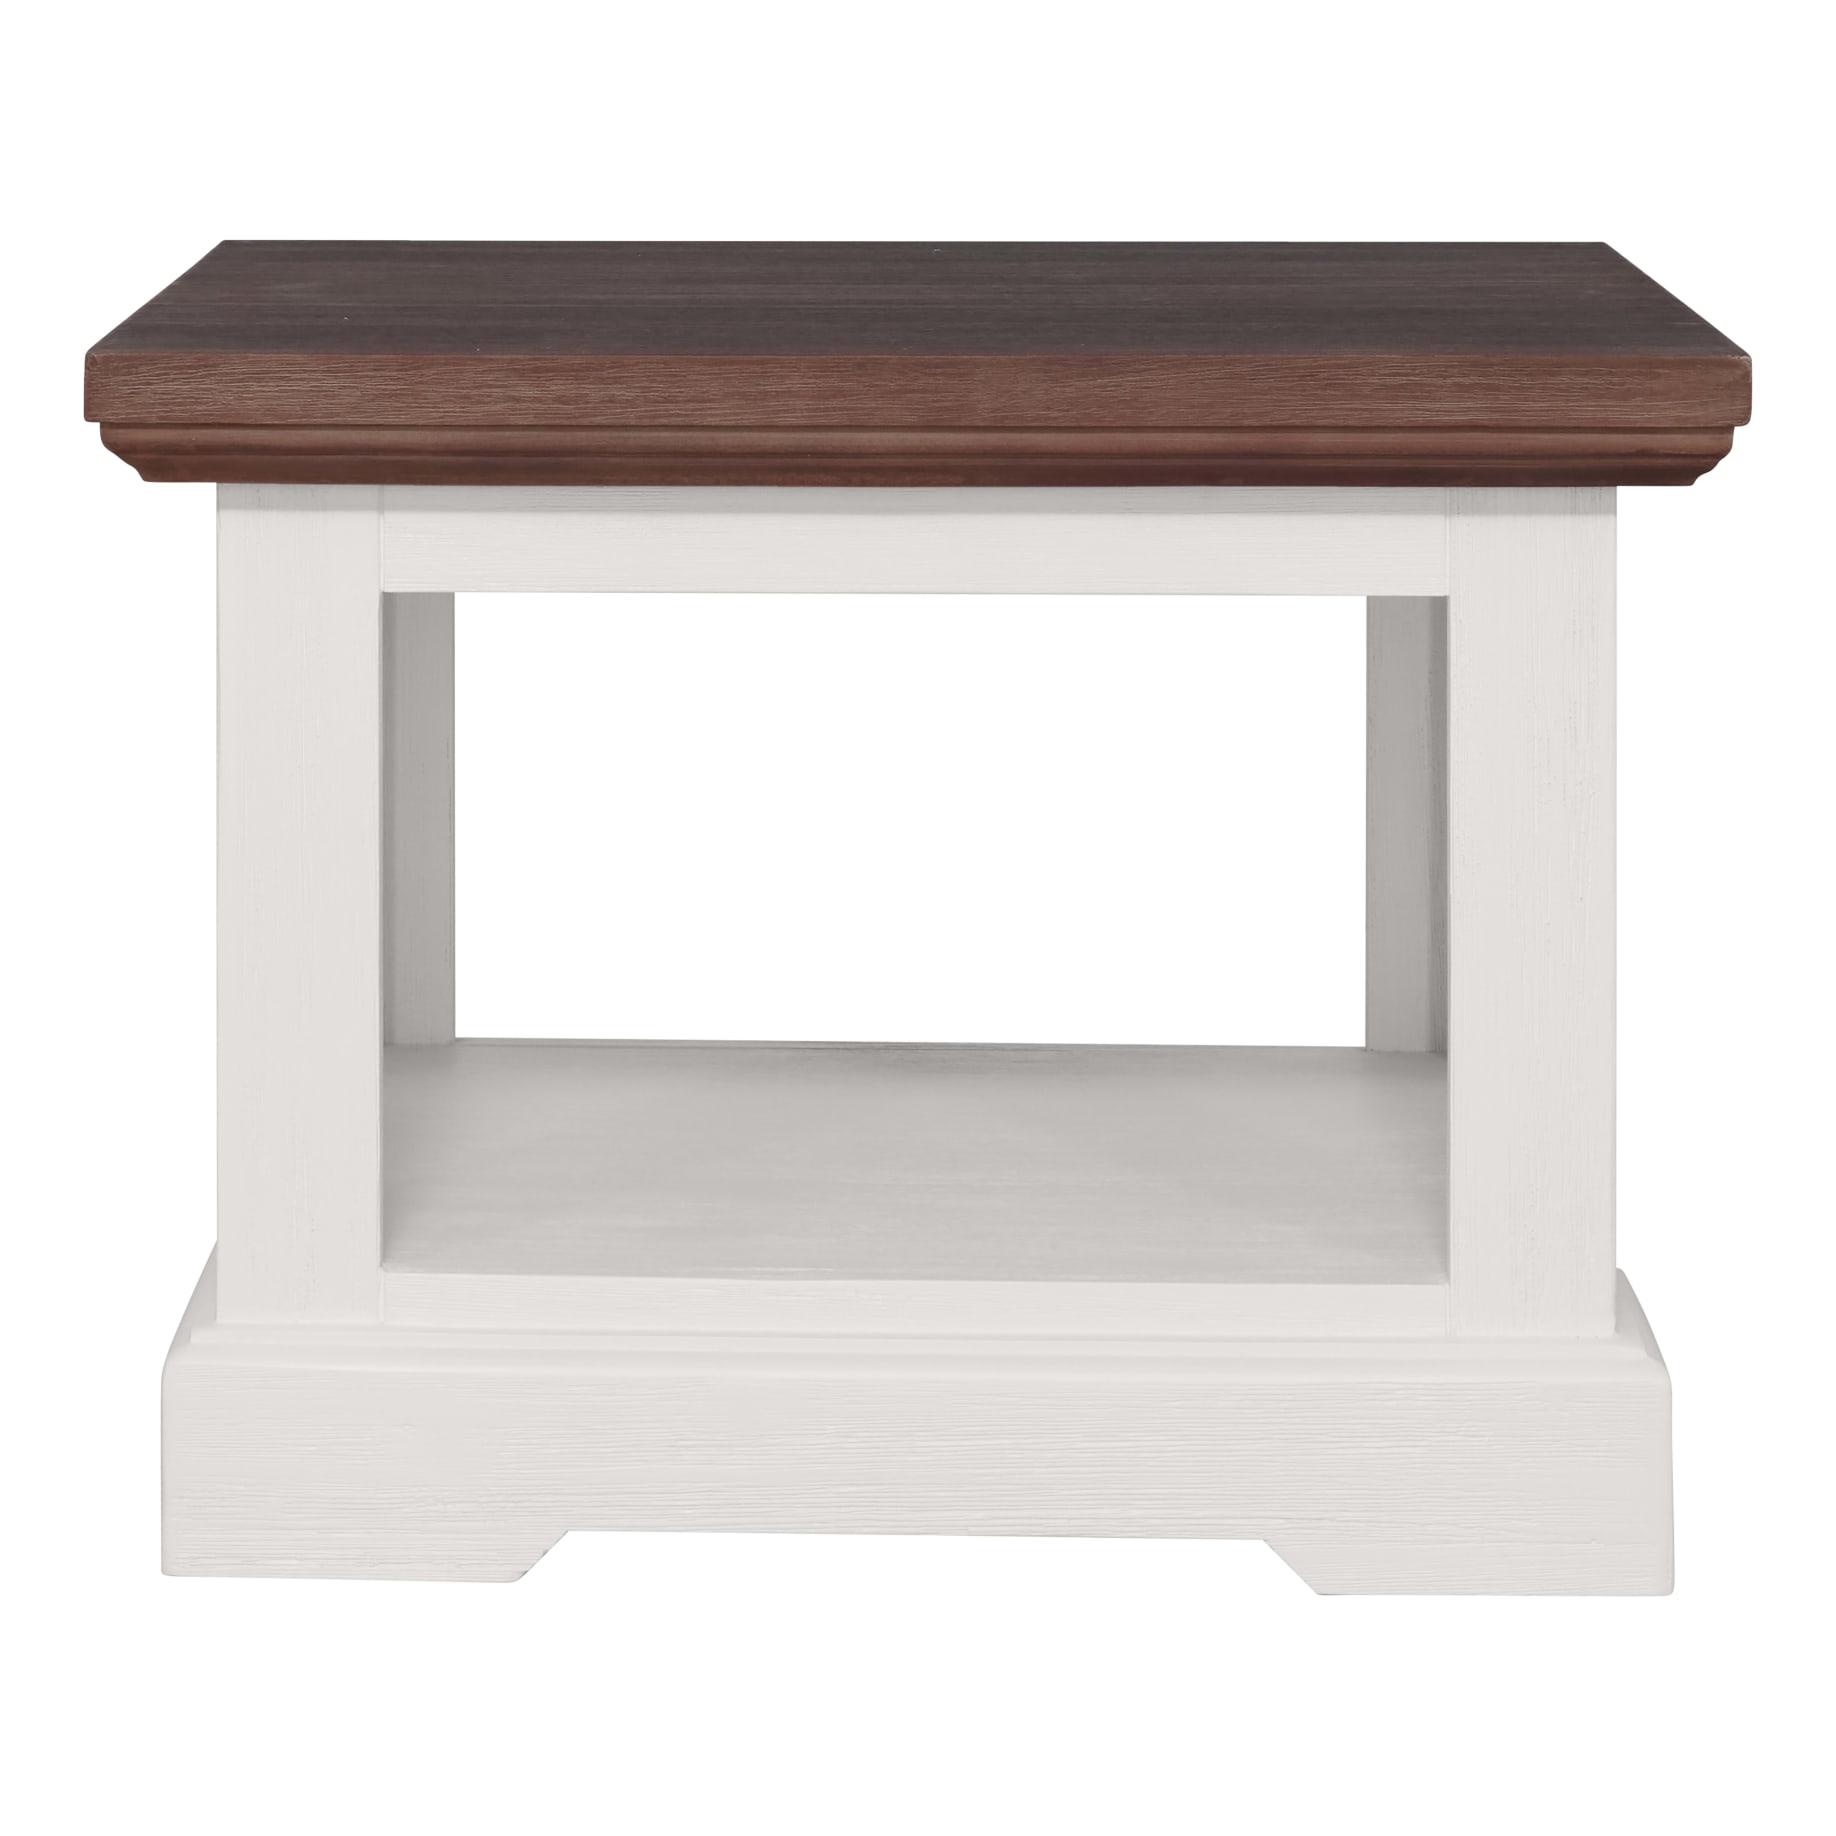 Hamptons Side Table in Two Tone